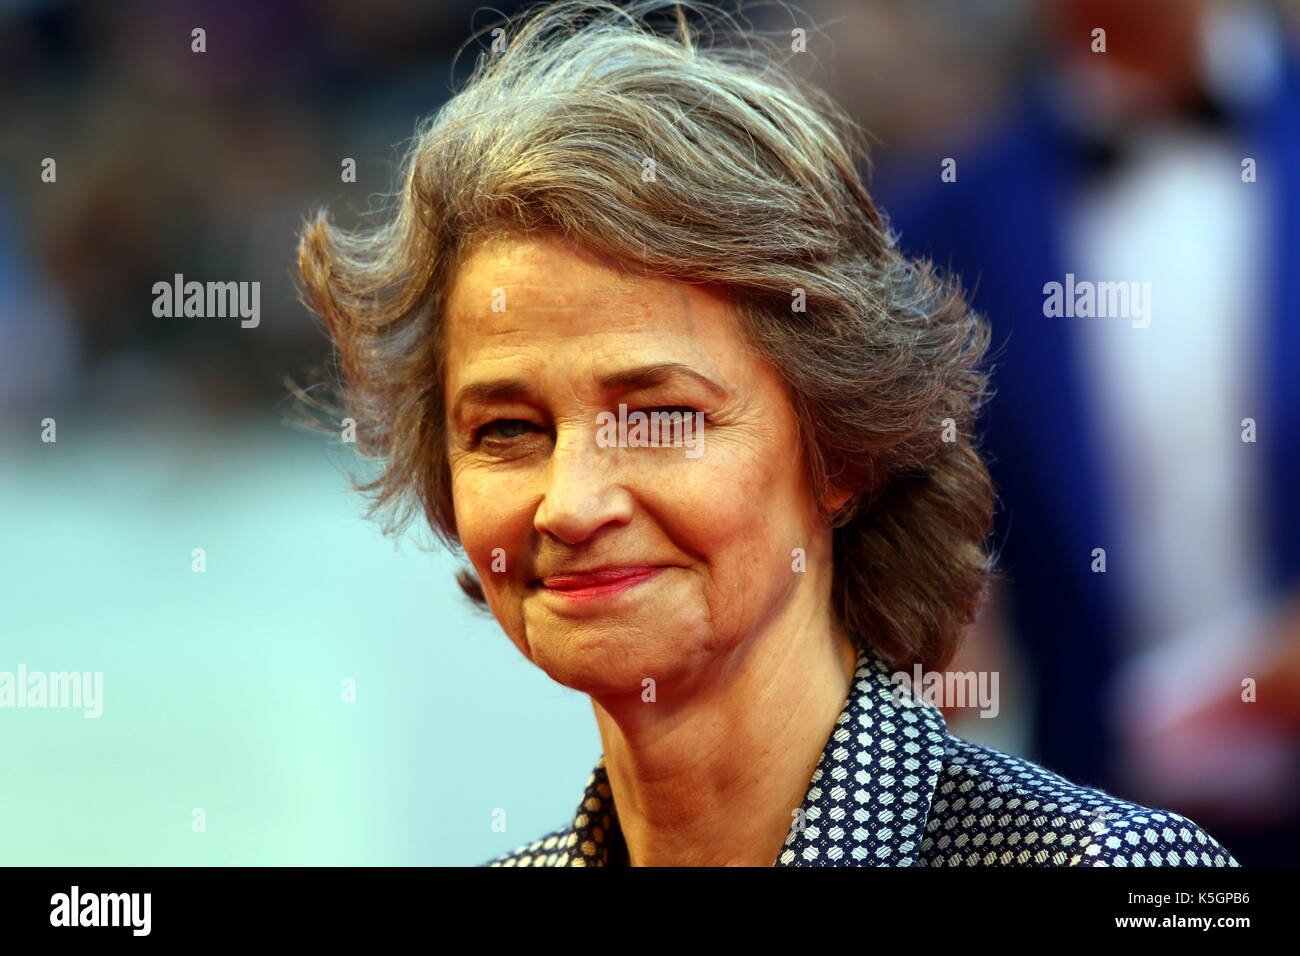 Venice, Italy. 9th September, 2017. Actress Charlotte Rampling attends at the Award Ceremony during the 74th Venice International Film Festival at Lido of Venice on 9th September, 2017. Credit: Andrea Spinelli/Alamy Live News Stock Photo